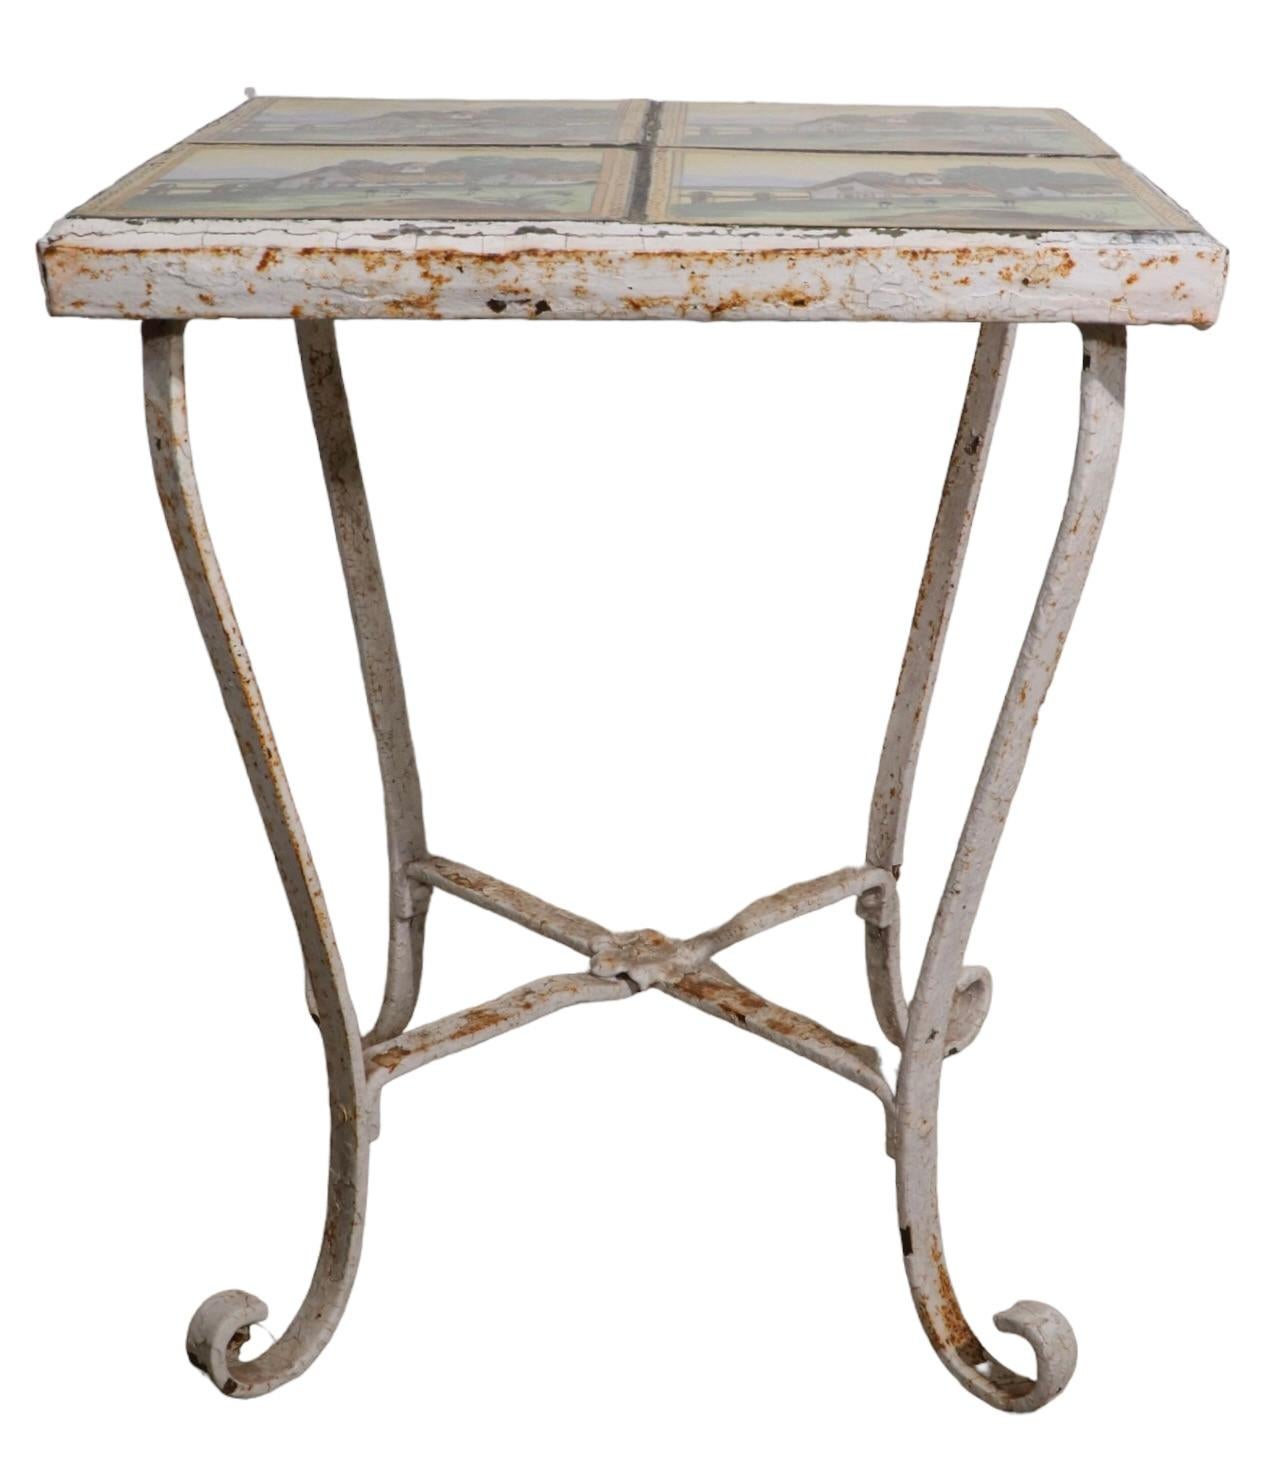 Antique Tile Top Wrought Iron Base Garden Patio Sunroom Table In Good Condition For Sale In New York, NY